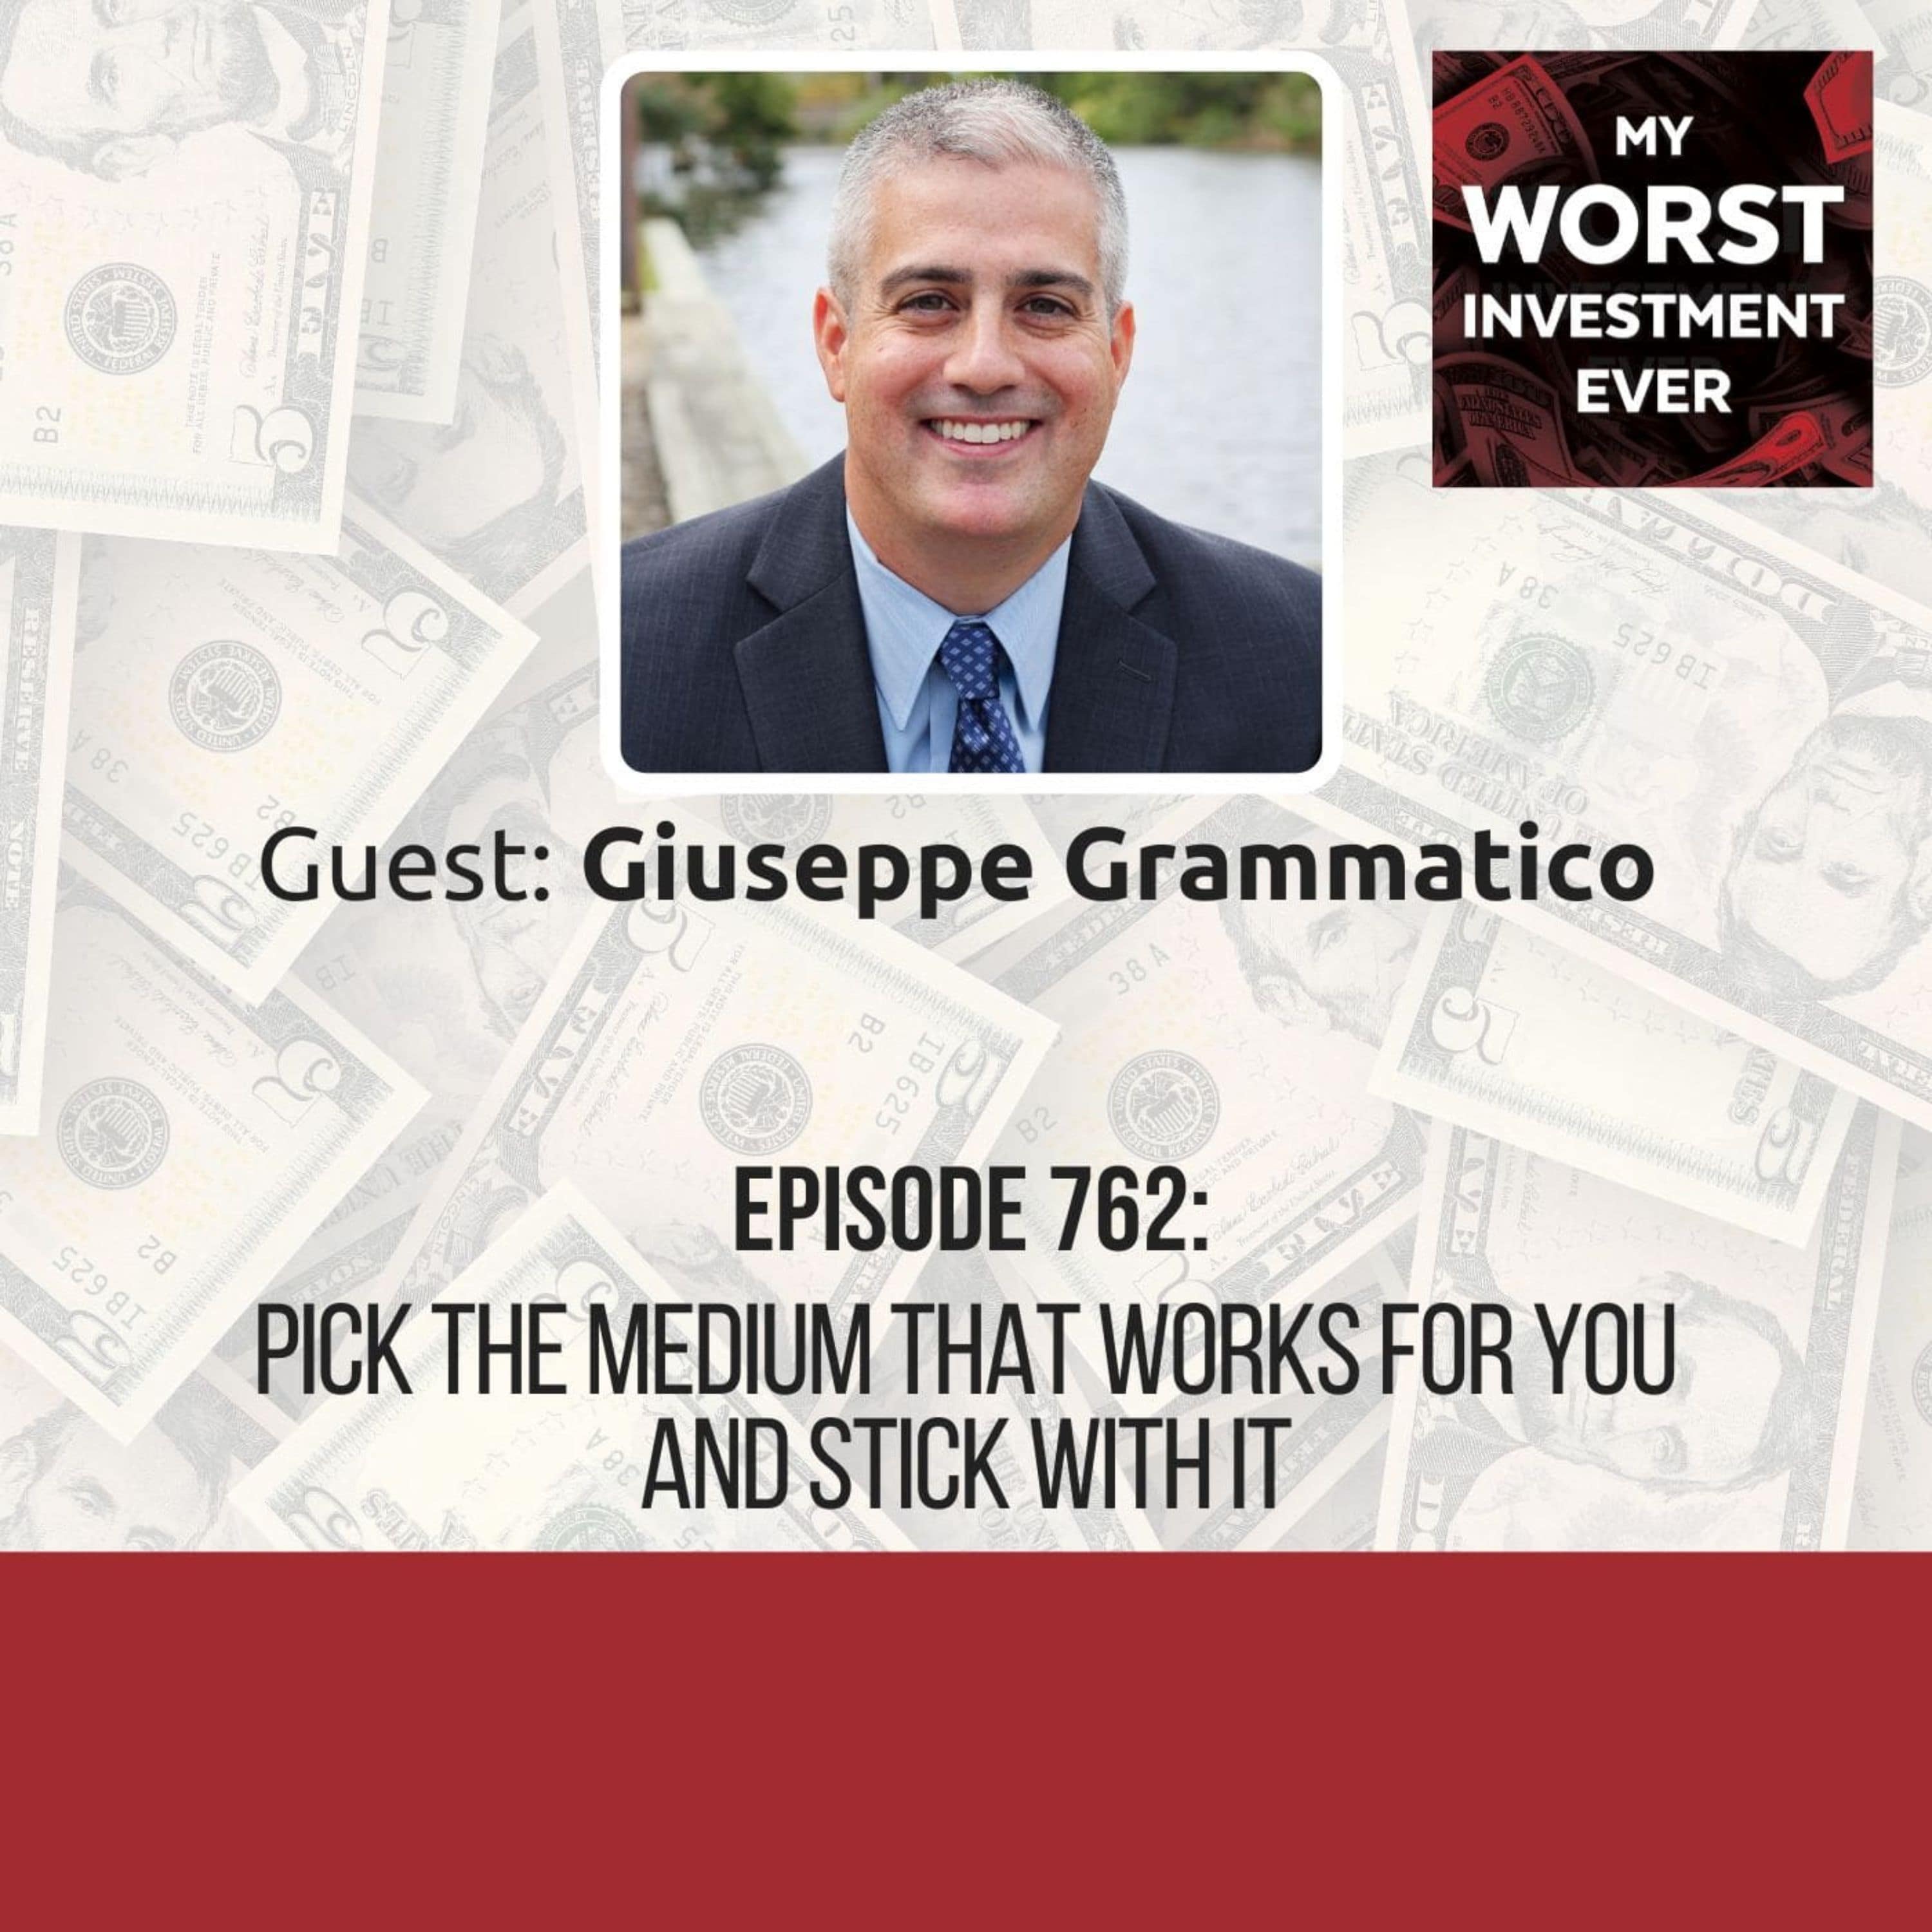 Giuseppe Grammatico - Pick the Medium That Works for You and Stick With It